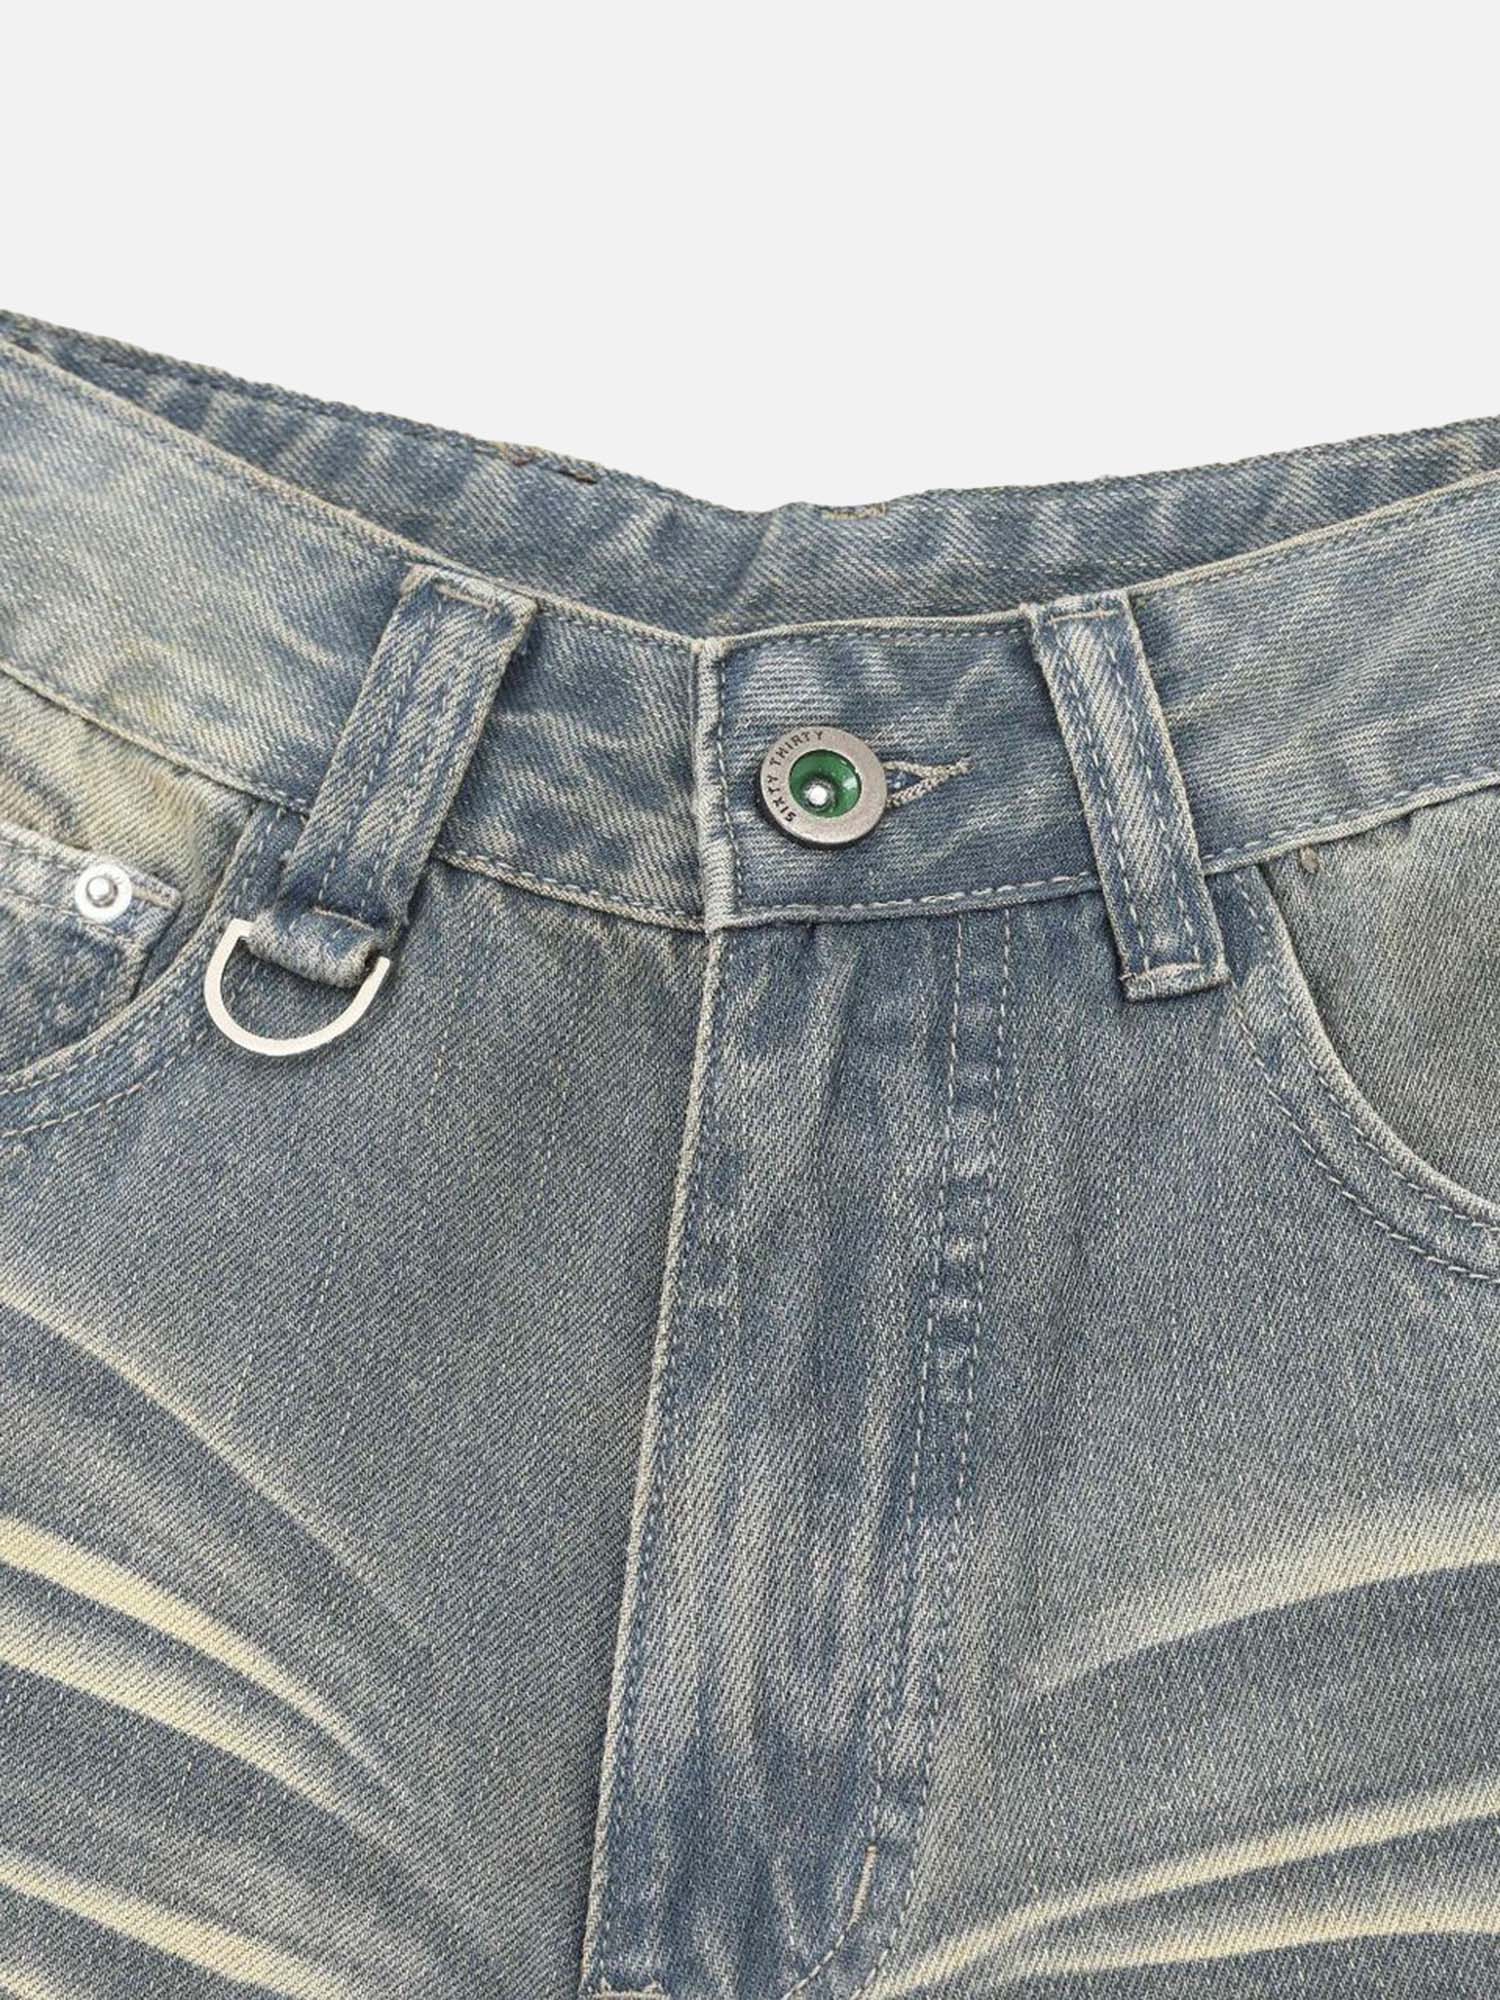 Thesupermade American Trendy Washed Denim Hip-Hop Shorts